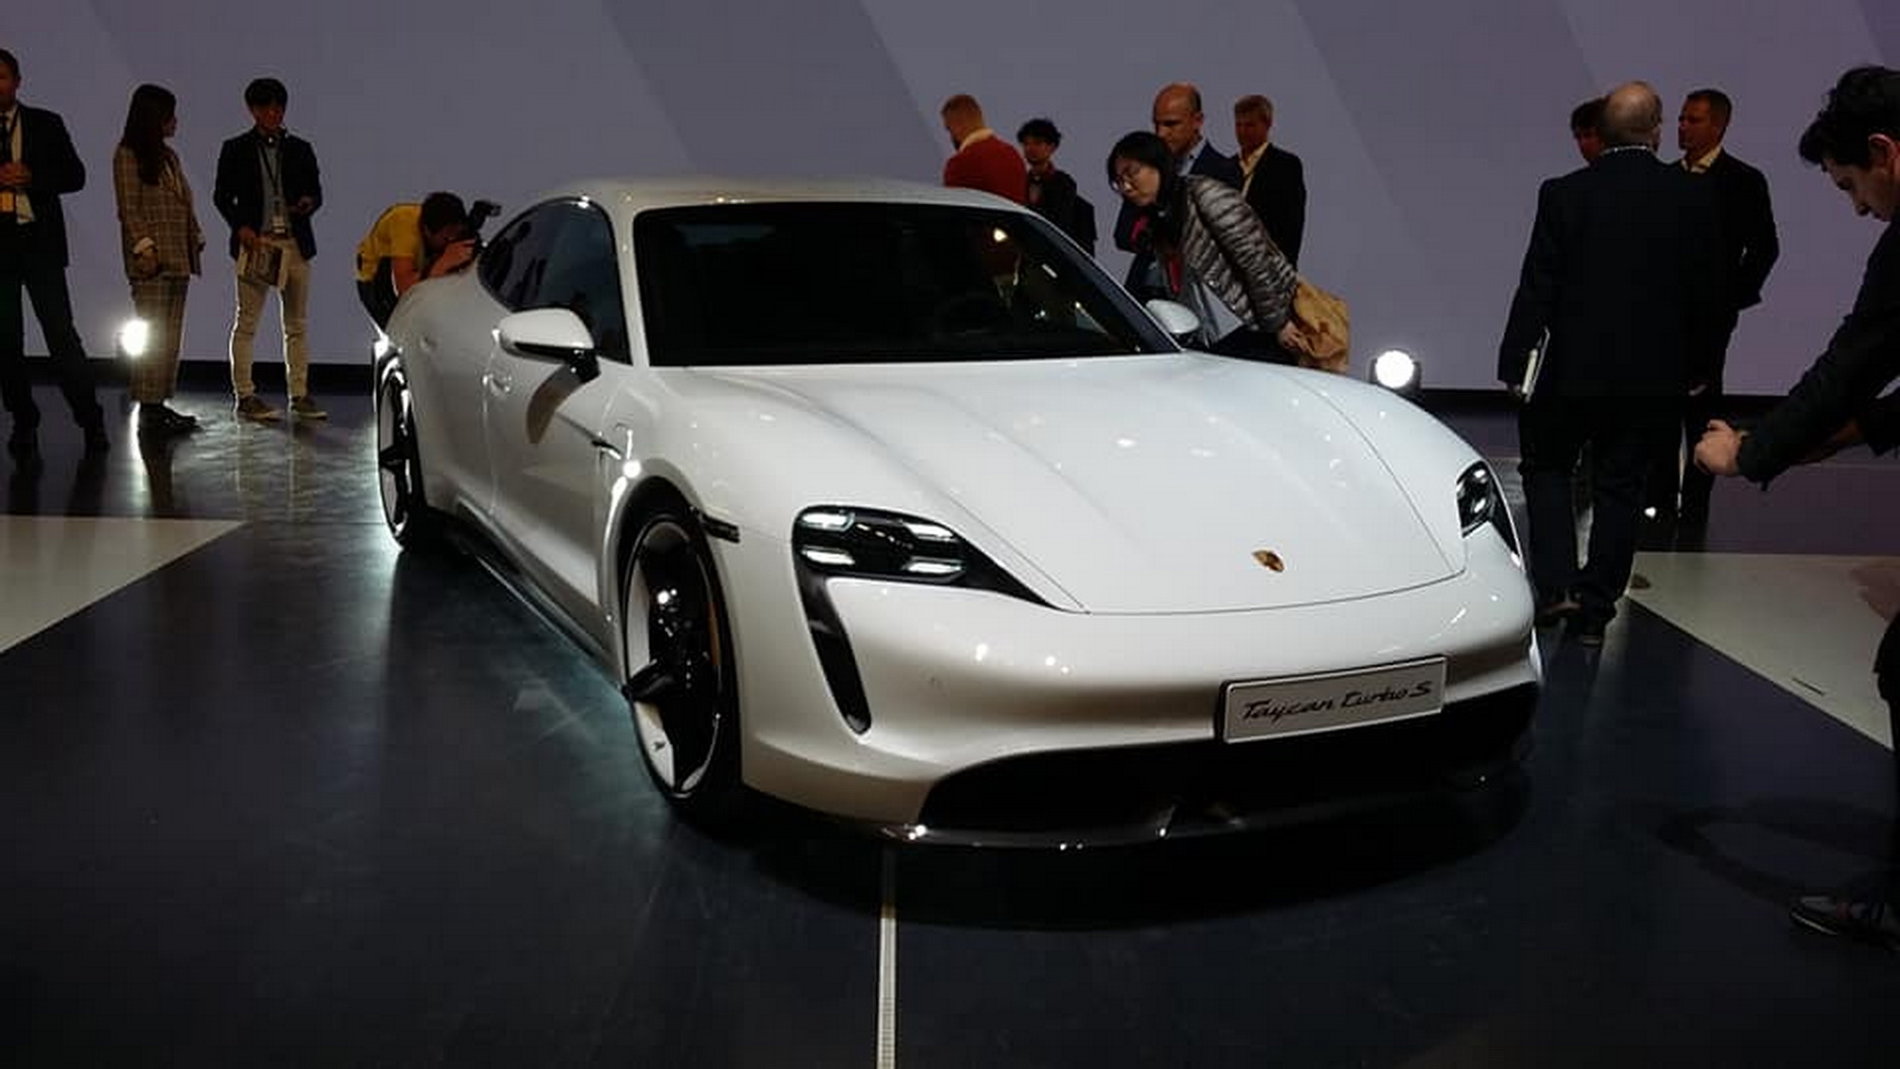 Porsche Taycan Official: Tayan Production will begin on time - September 9 70450169_1233228896856327_5961812020171898880_n